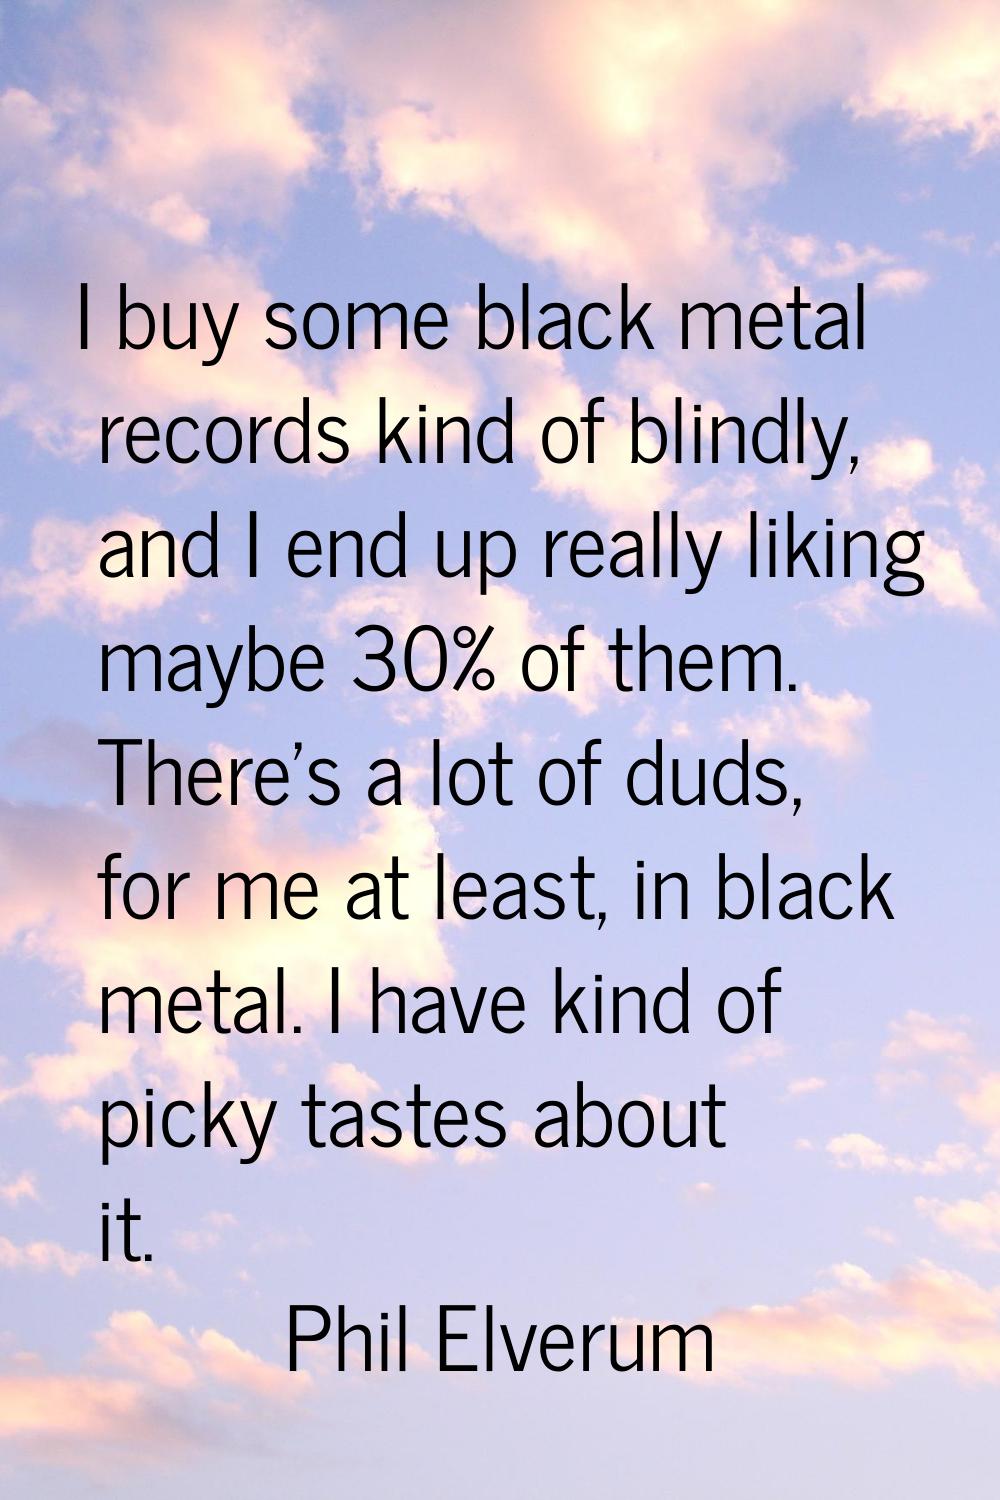 I buy some black metal records kind of blindly, and I end up really liking maybe 30% of them. There